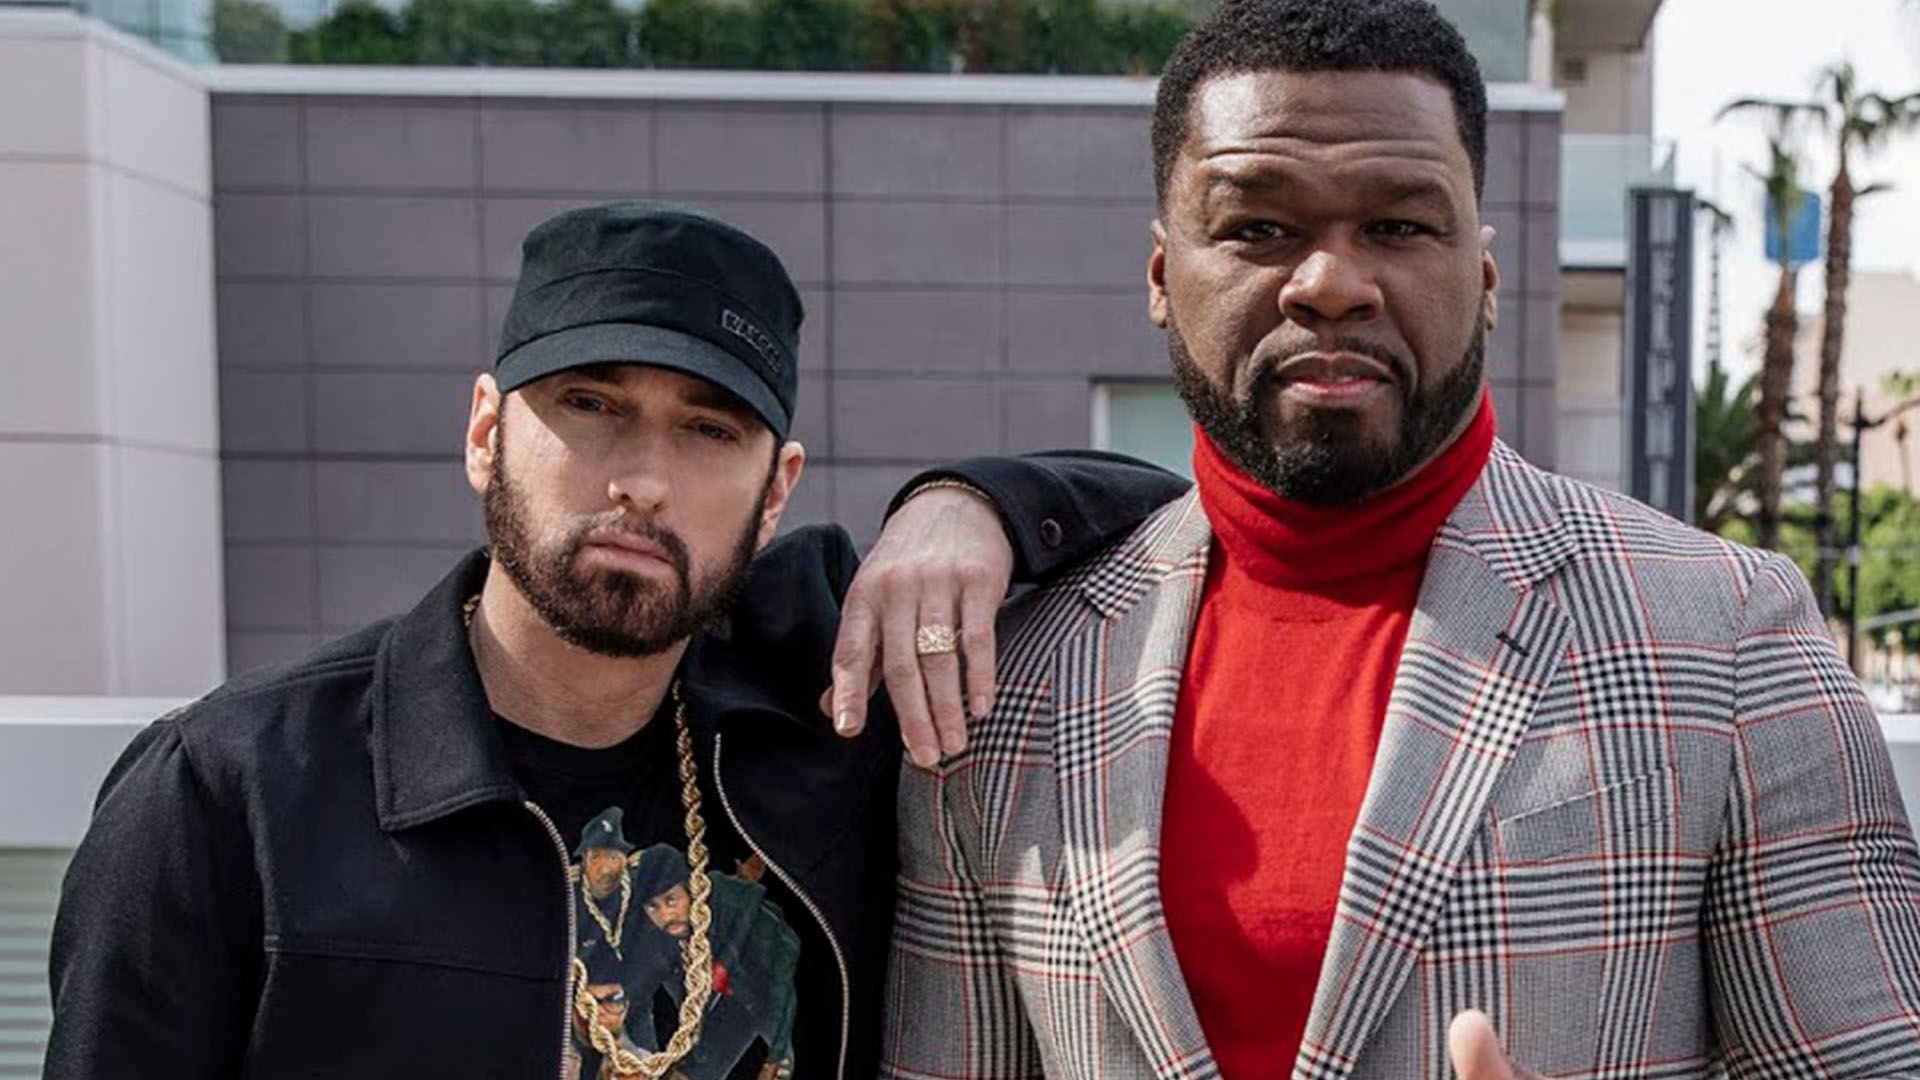 A Tv Series Called "8 Mile" Is Being Developed By 50 Cent To Carry On Eminem's "Legacy"